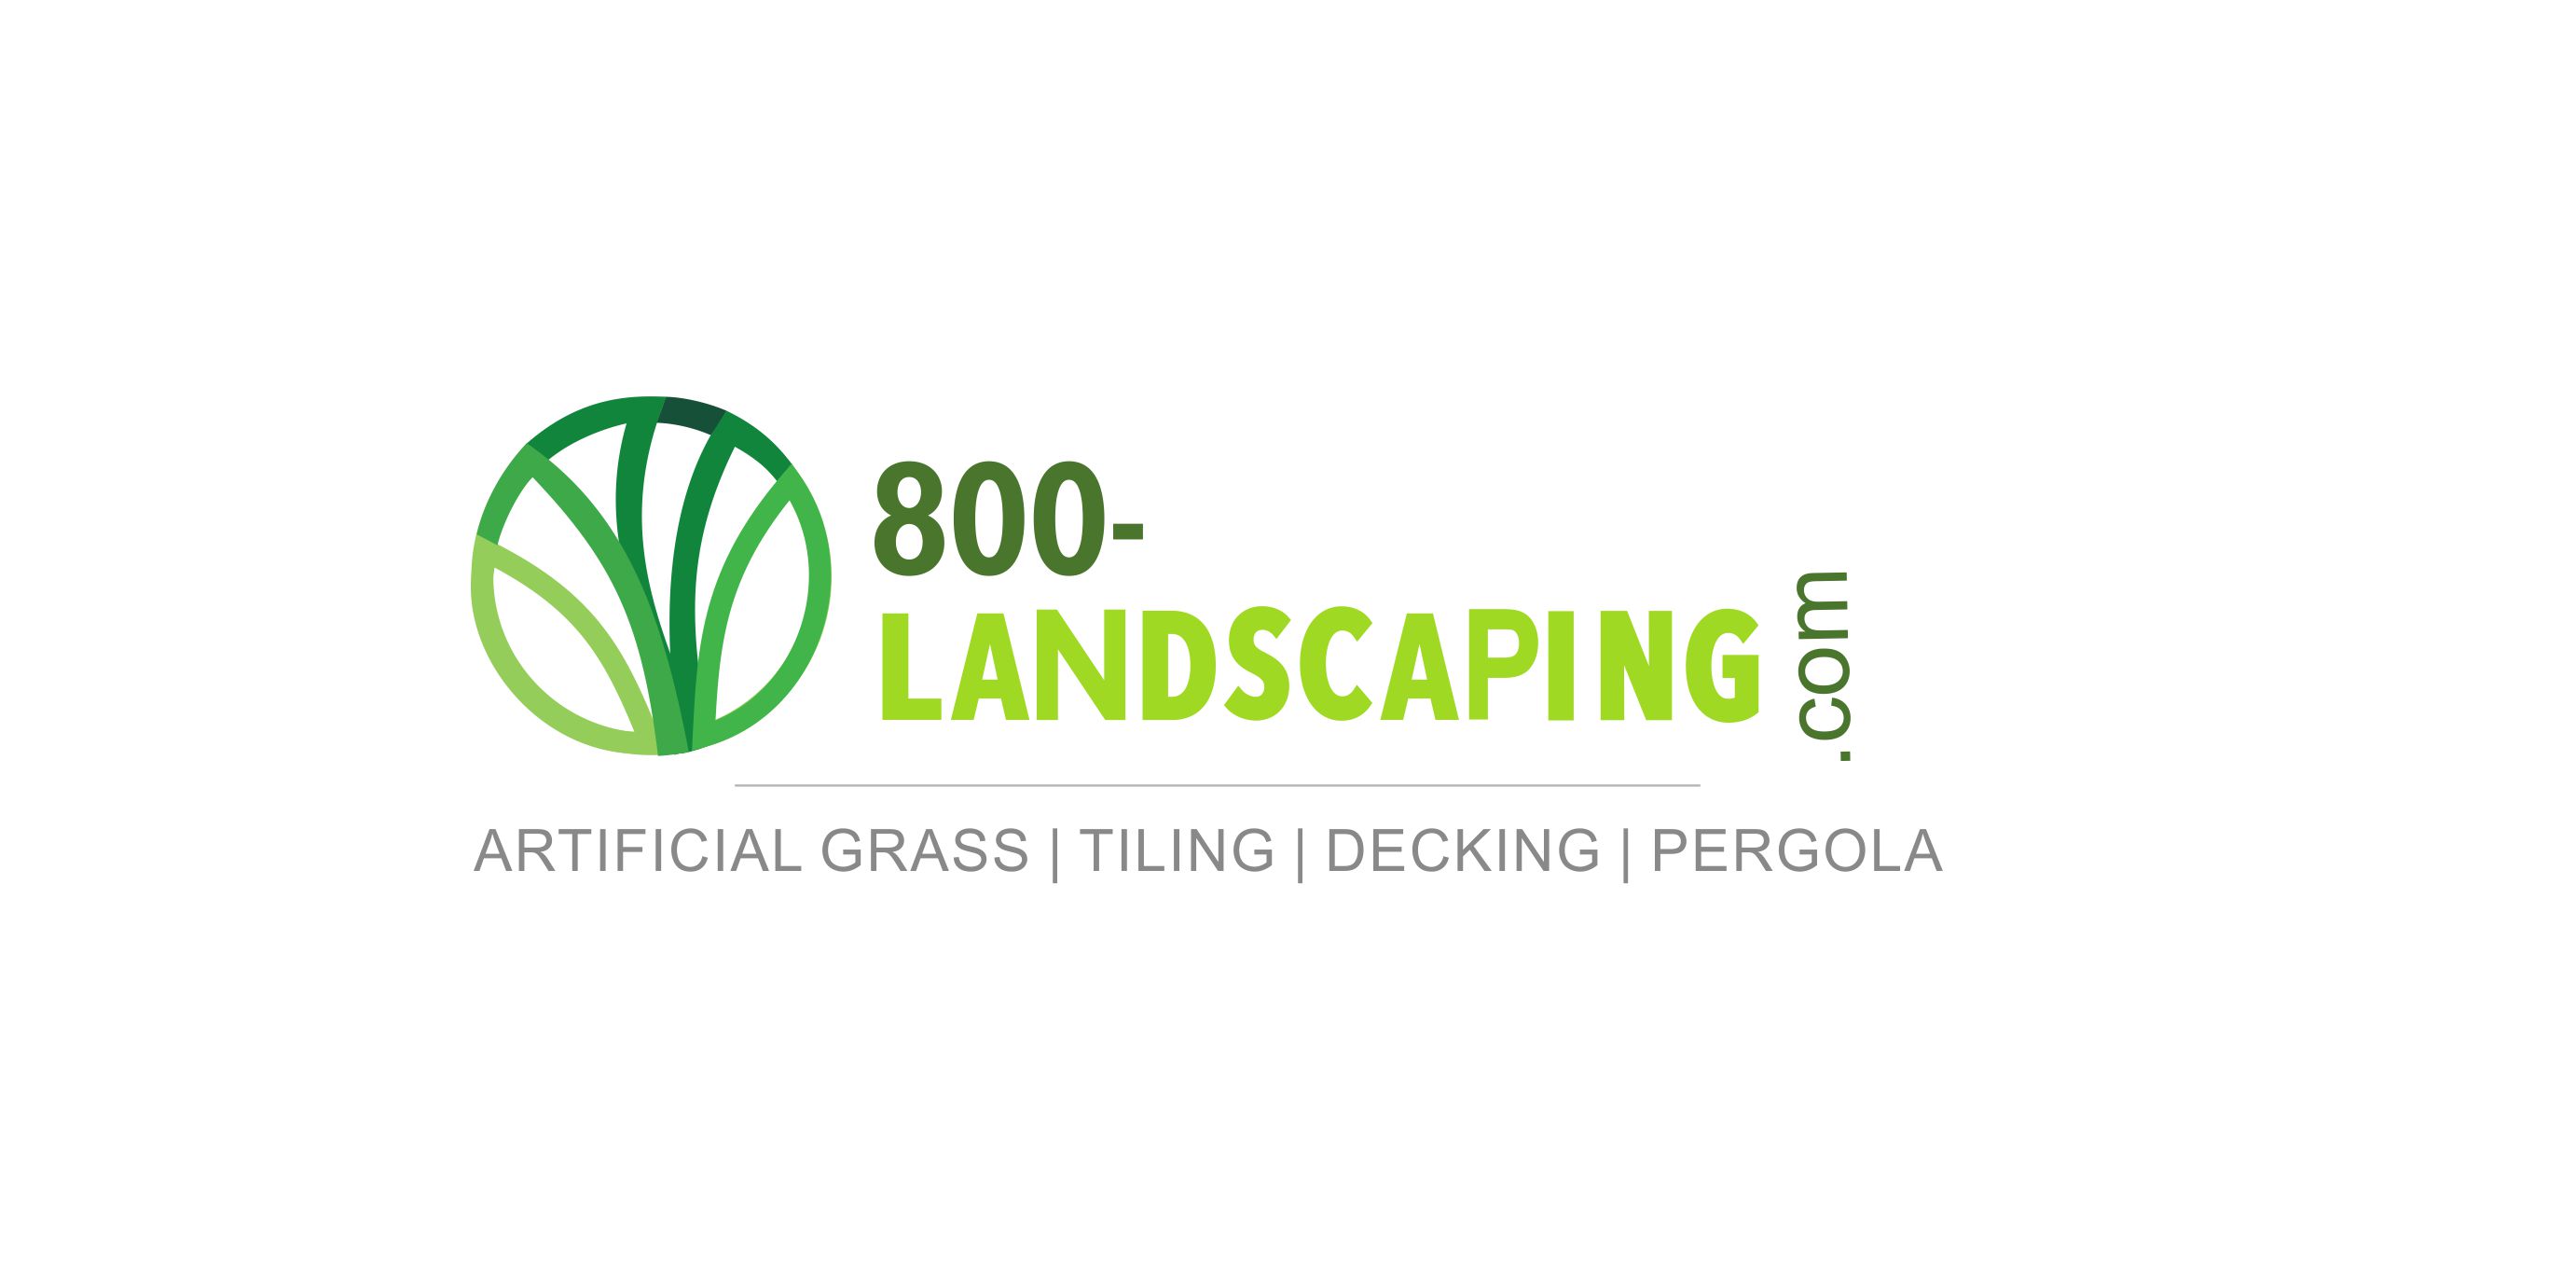 800 Landscaping